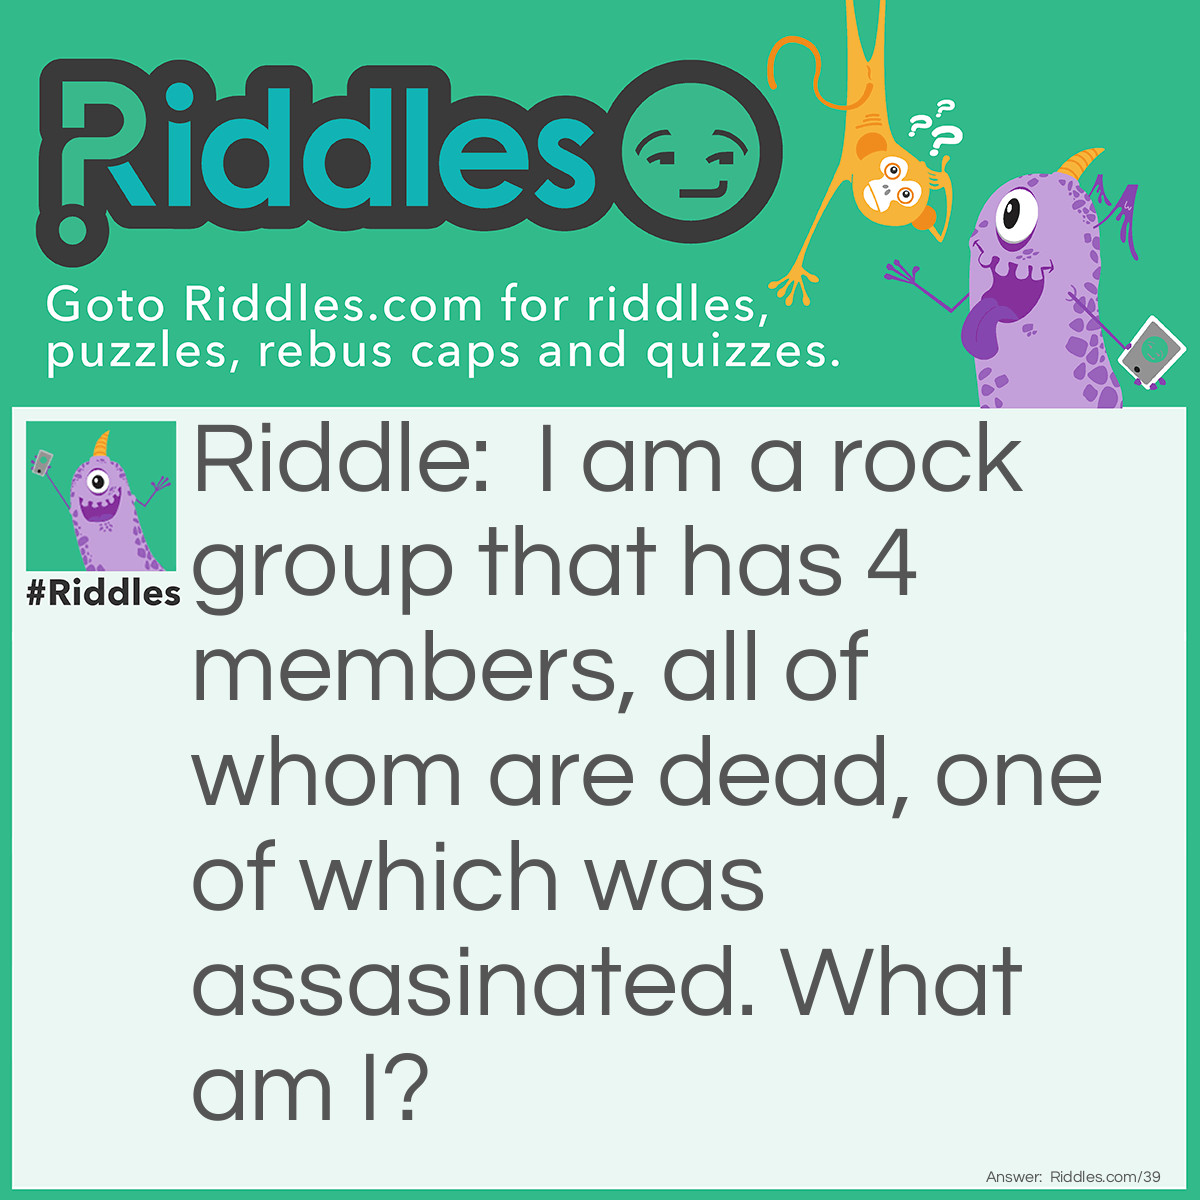 Riddle: I am a rock group that has 4 members, all of whom are dead, one of which was assasinated. What am I? Answer: Mount Rushmore.  Get it, rock group?